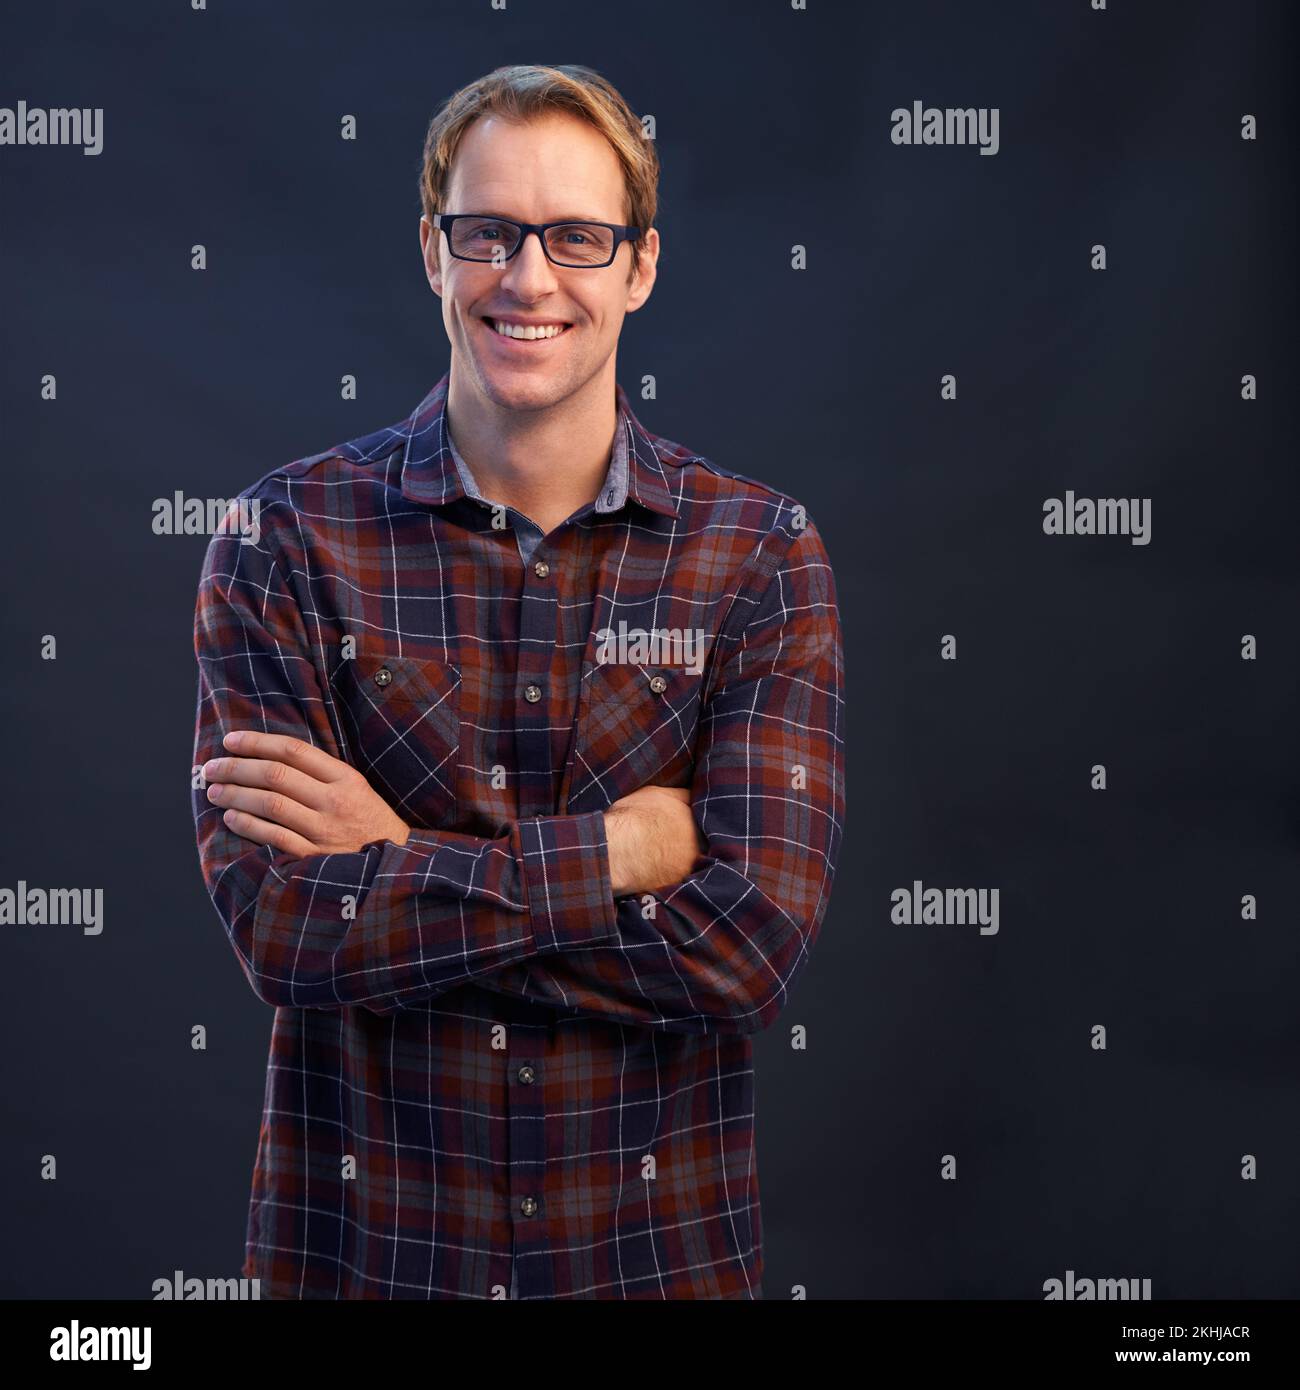 As smart as he is handsome. A studio portrait of a handsome man wearing glasses. Stock Photo